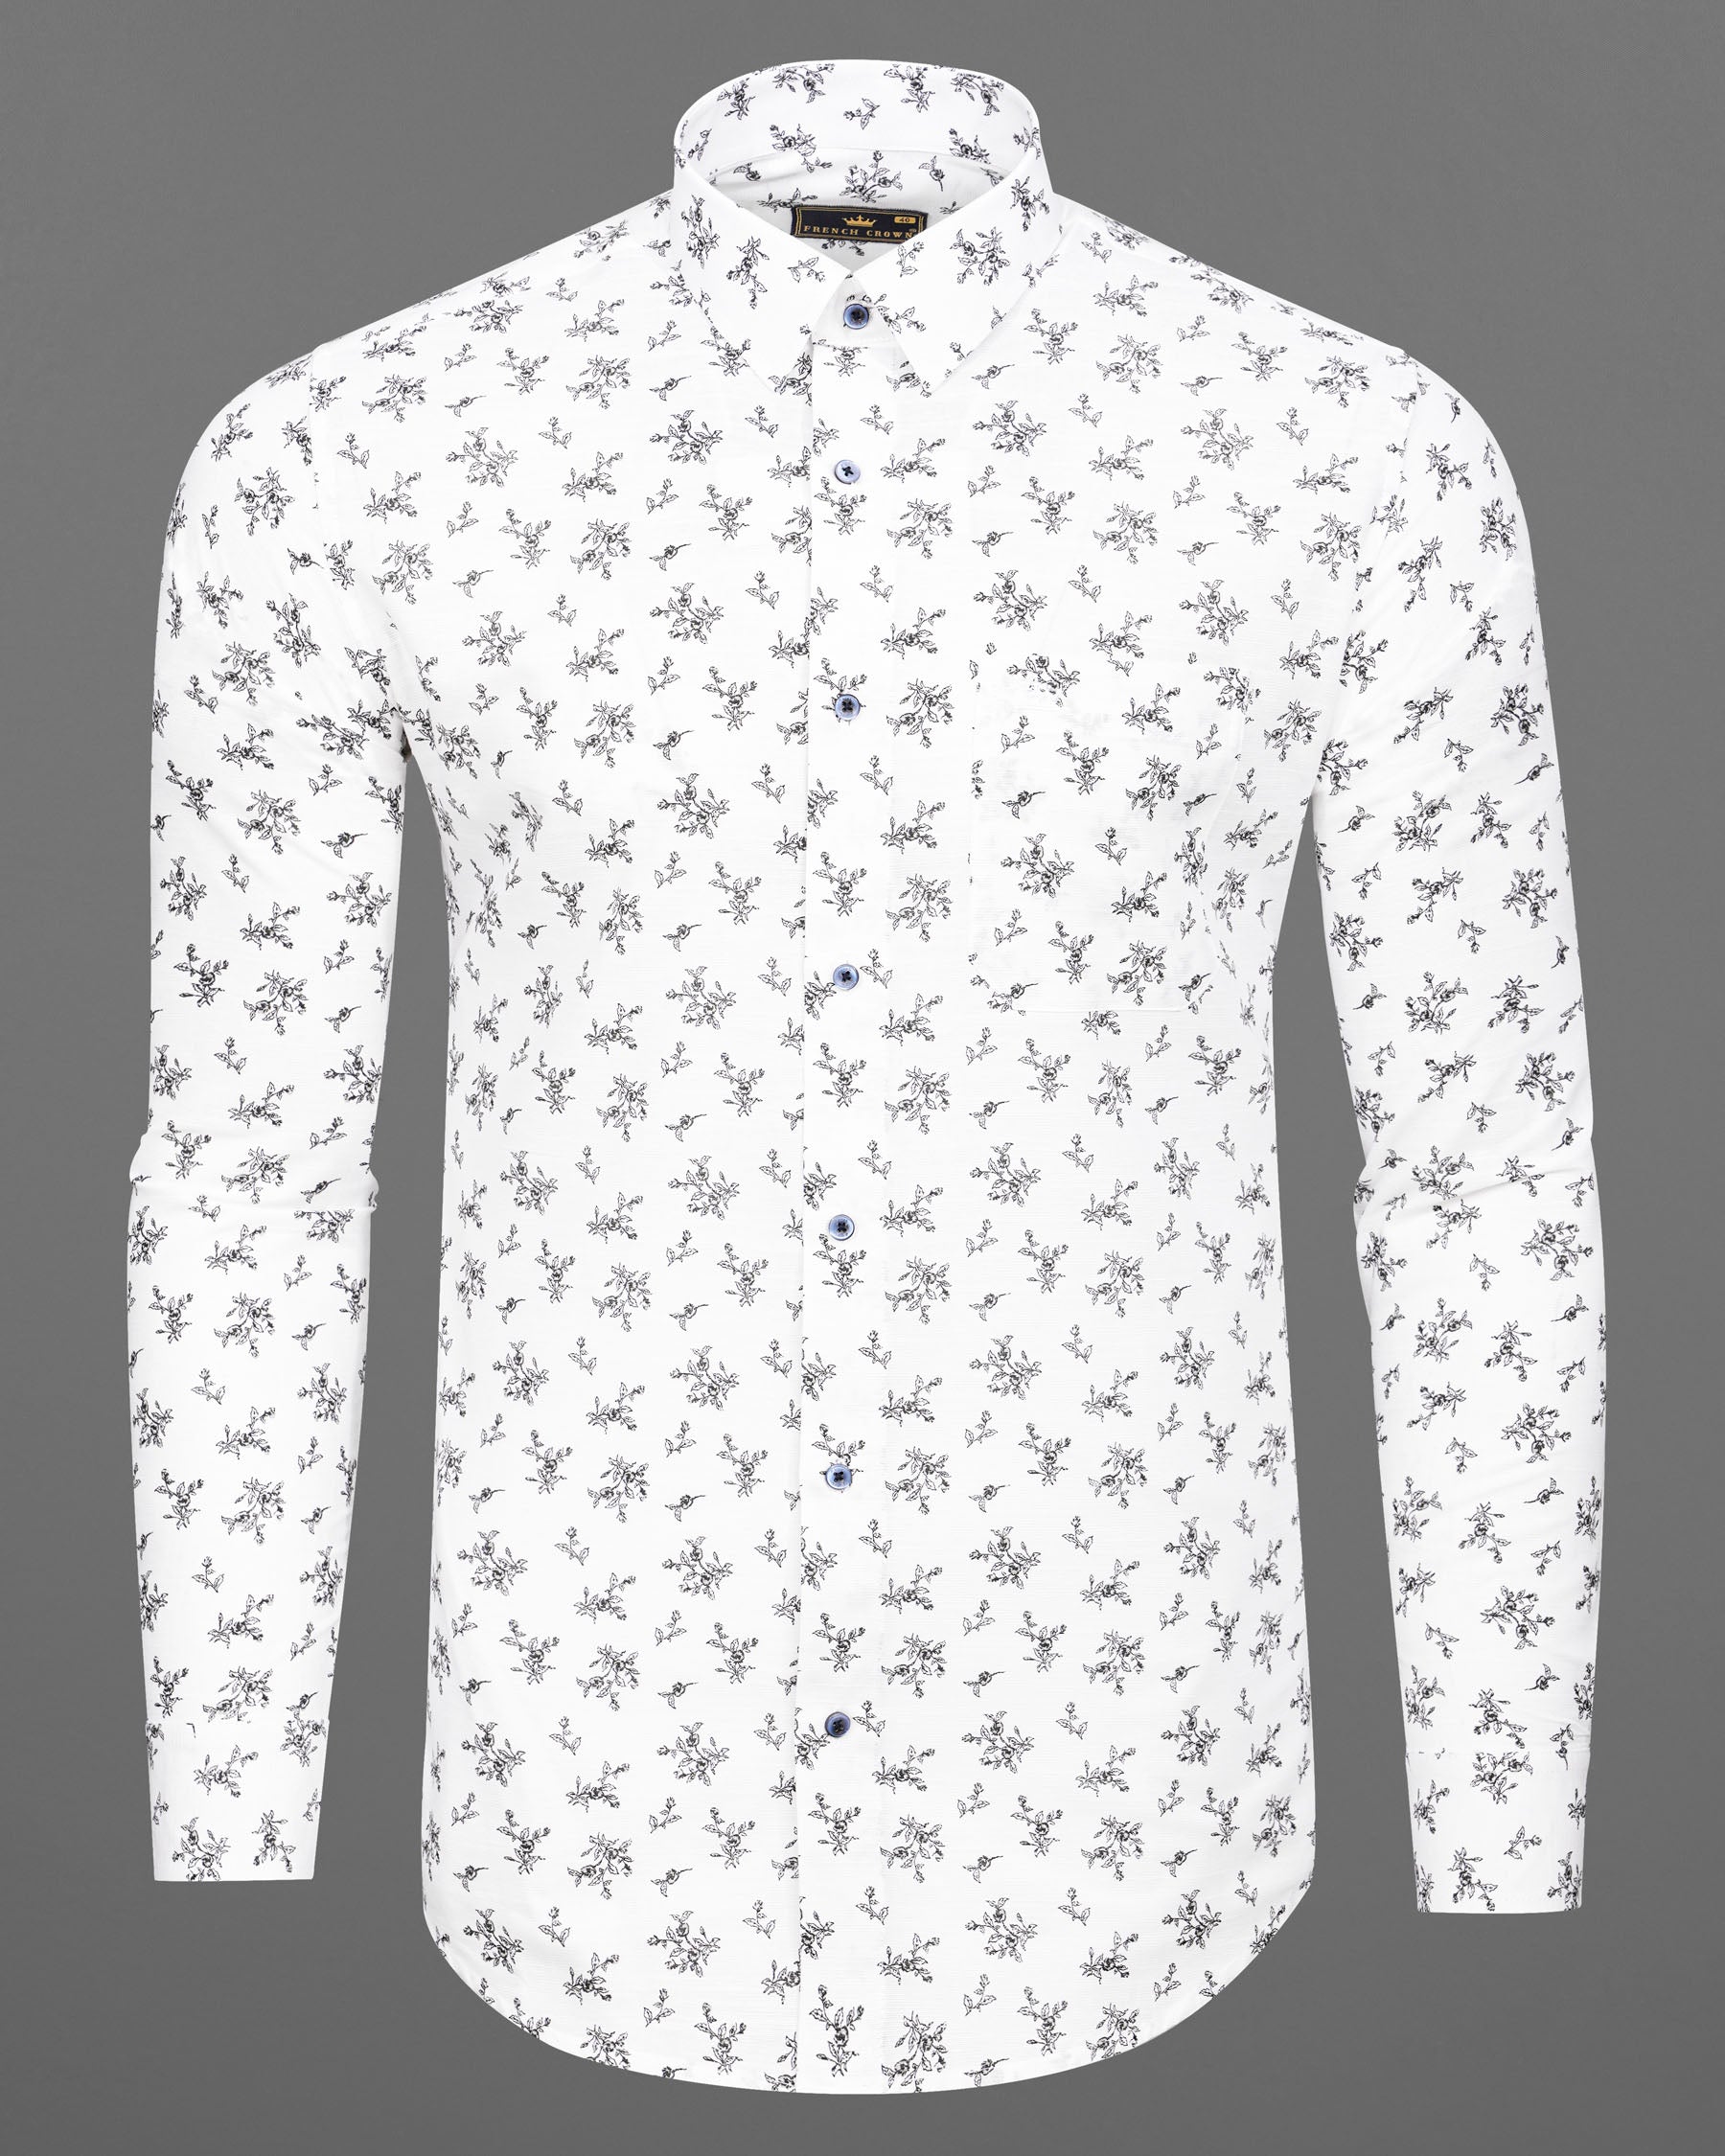 Bright White Floral Printed Luxurious Linen Shirt 7178-BLE-38,7178-BLE-H-38,7178-BLE-39,7178-BLE-H-39,7178-BLE-40,7178-BLE-H-40,7178-BLE-42,7178-BLE-H-42,7178-BLE-44,7178-BLE-H-44,7178-BLE-46,7178-BLE-H-46,7178-BLE-48,7178-BLE-H-48,7178-BLE-50,7178-BLE-H-50,7178-BLE-52,7178-BLE-H-52